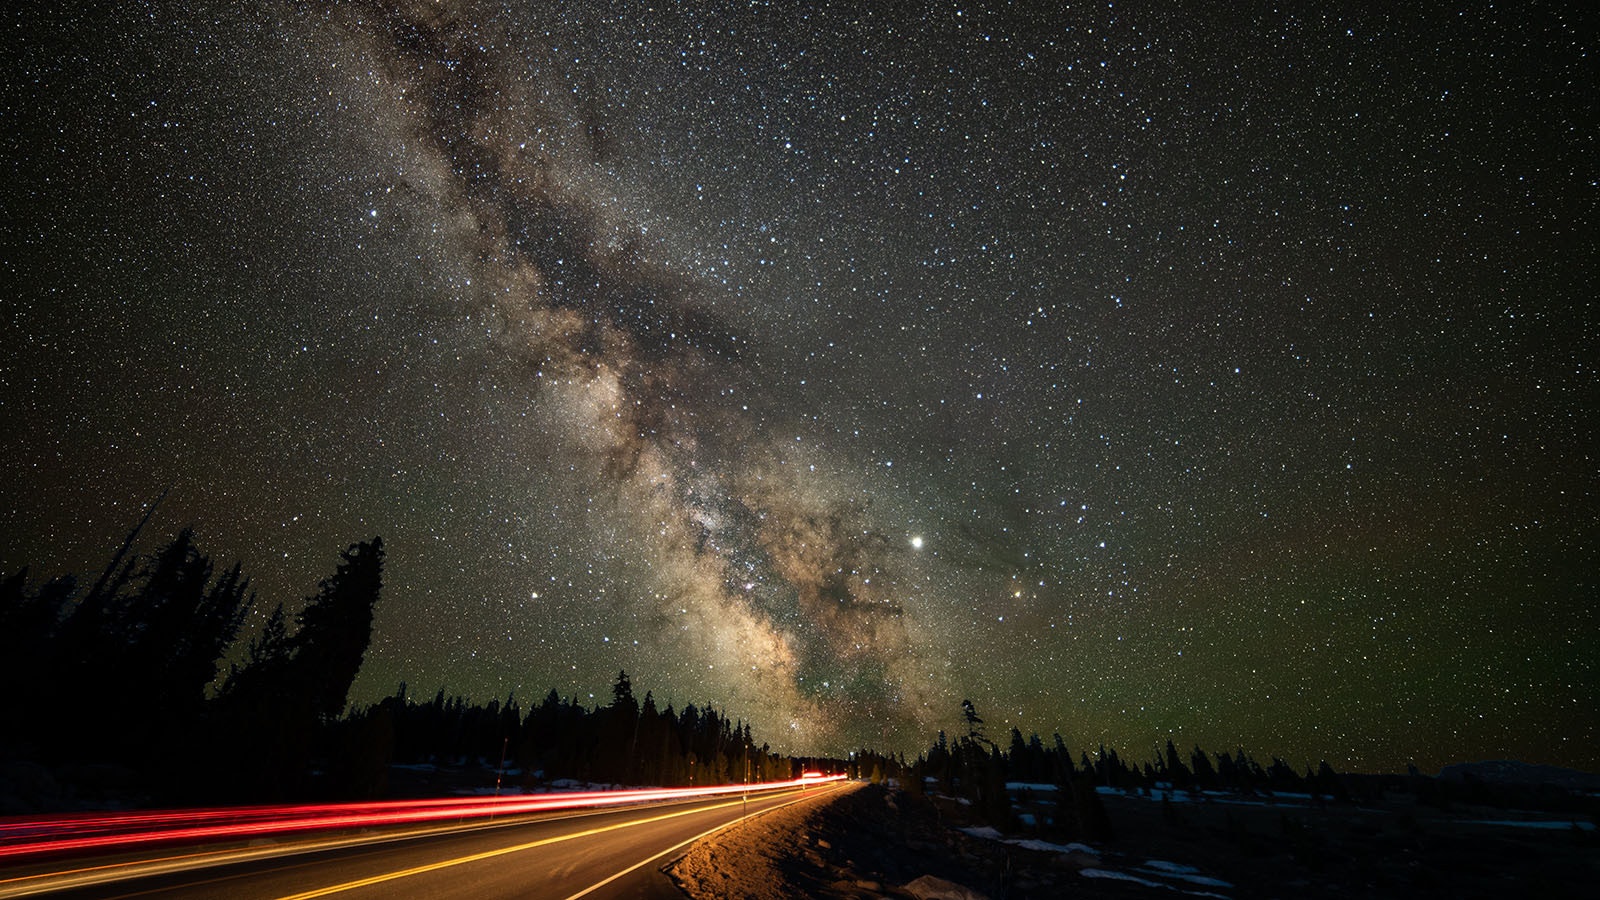 The Milky Way Galaxy as seen in the pristine night skies over Wyoming. This photo is a time-lapse image taken along the Beartooth Highway.